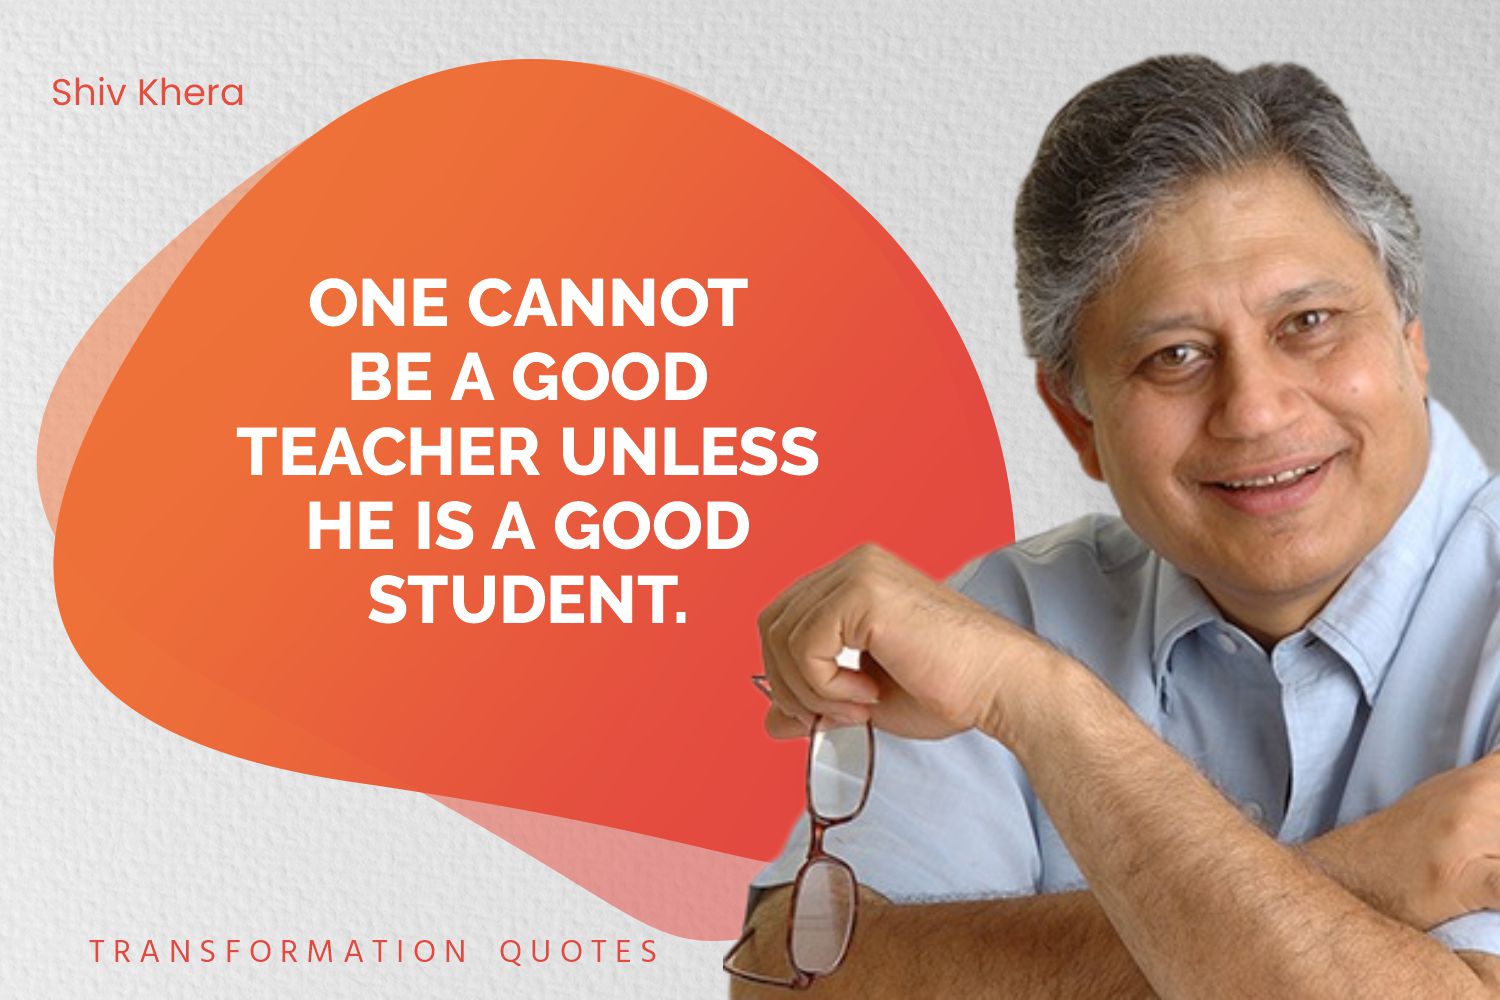 10 Shiv Khera Quotes That Will Inspire You Transformationquotes 